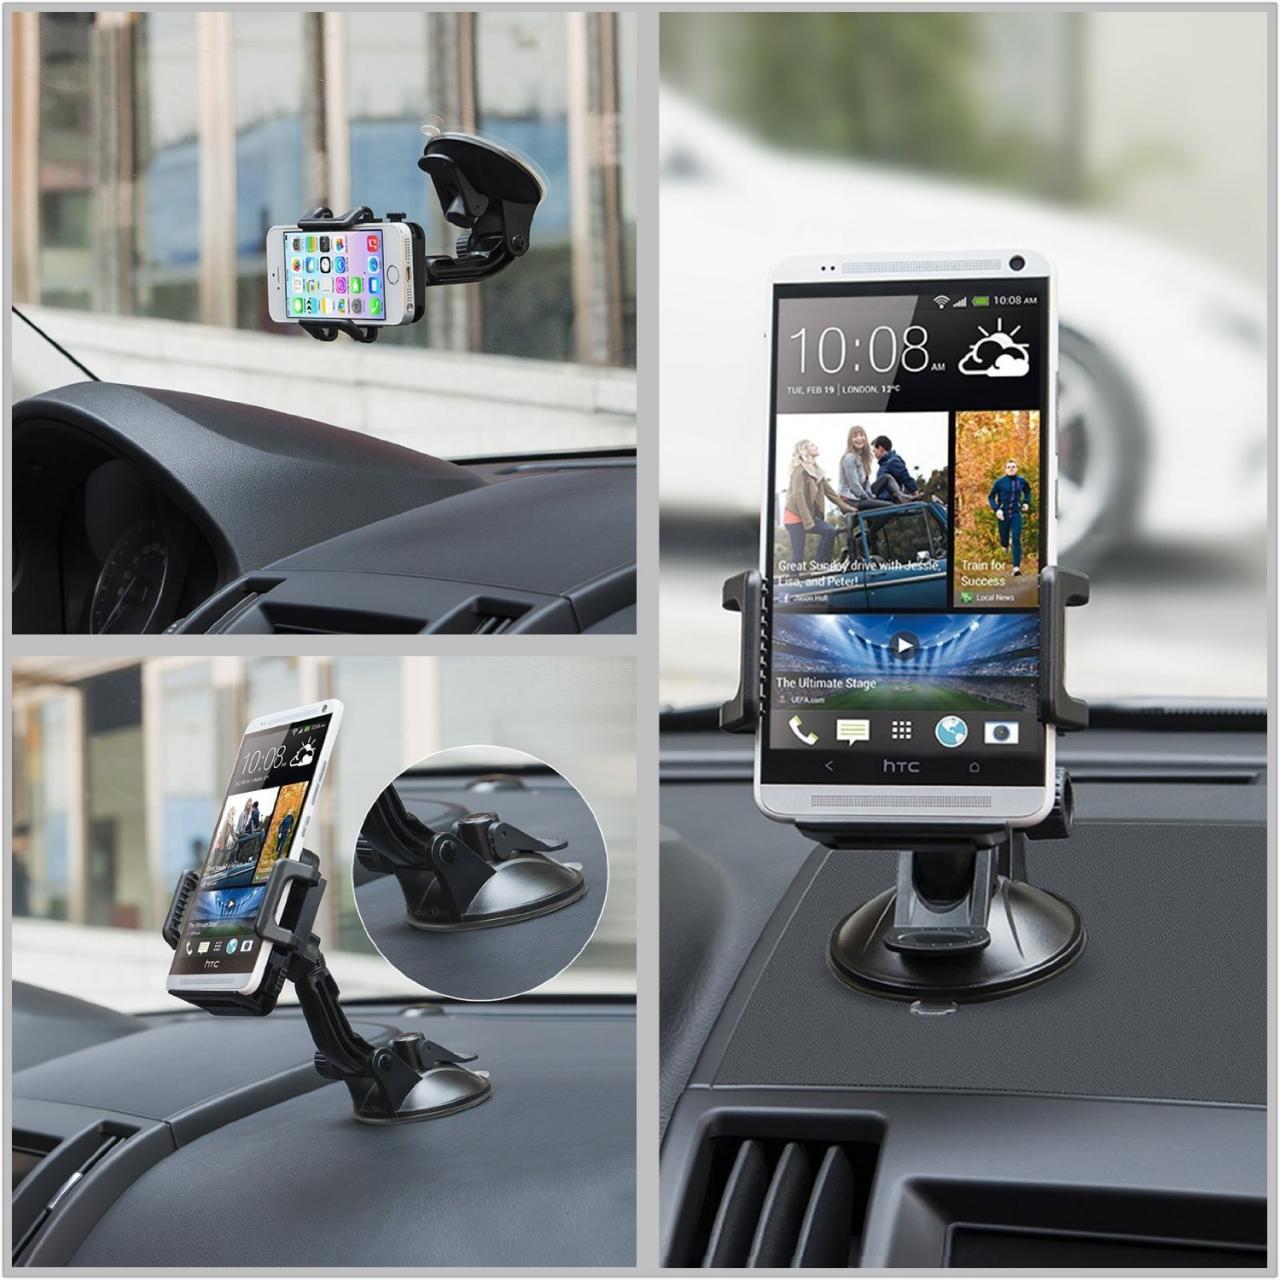 Top 10 Best Car Phone Mount Holders for IPhone/Samsung